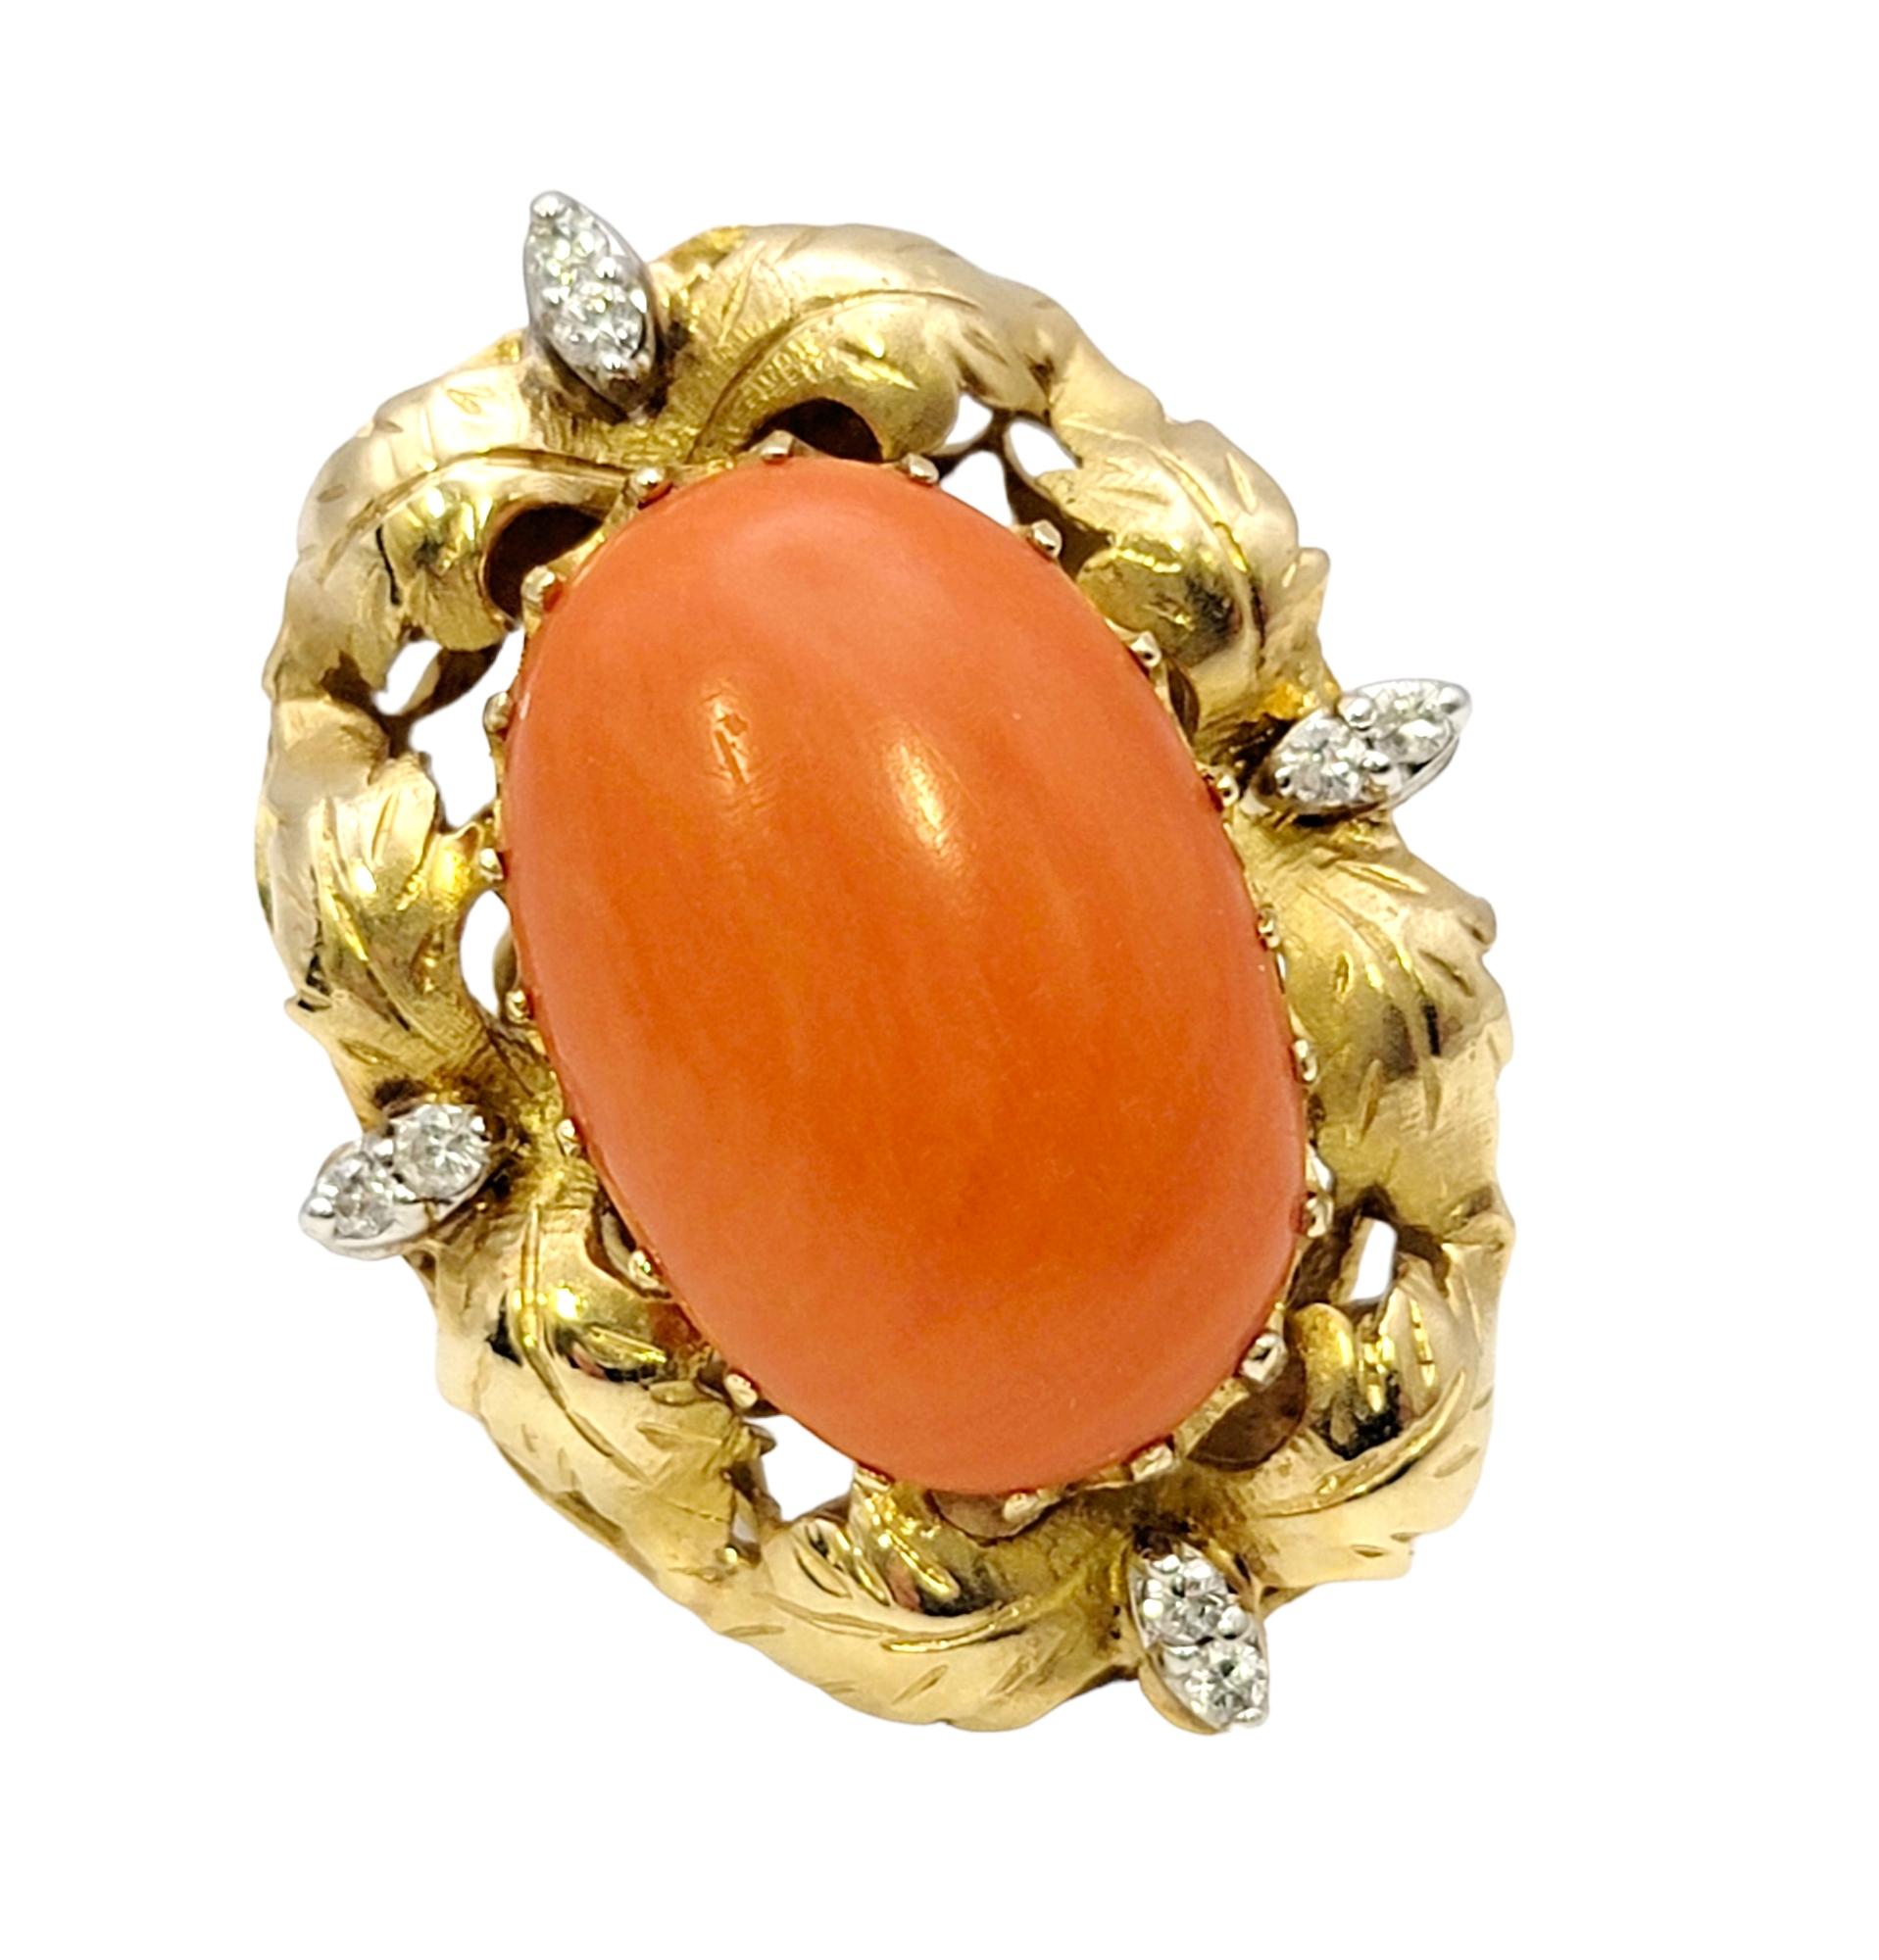 Ring size: 6.5

Featured here is a bold, elegant vintage coral and diamond cocktail ring. The bright orange oval cabochon stone is surrounded by an ornate gold leaf design and accented by several sparkling diamonds to give it an extra touch of